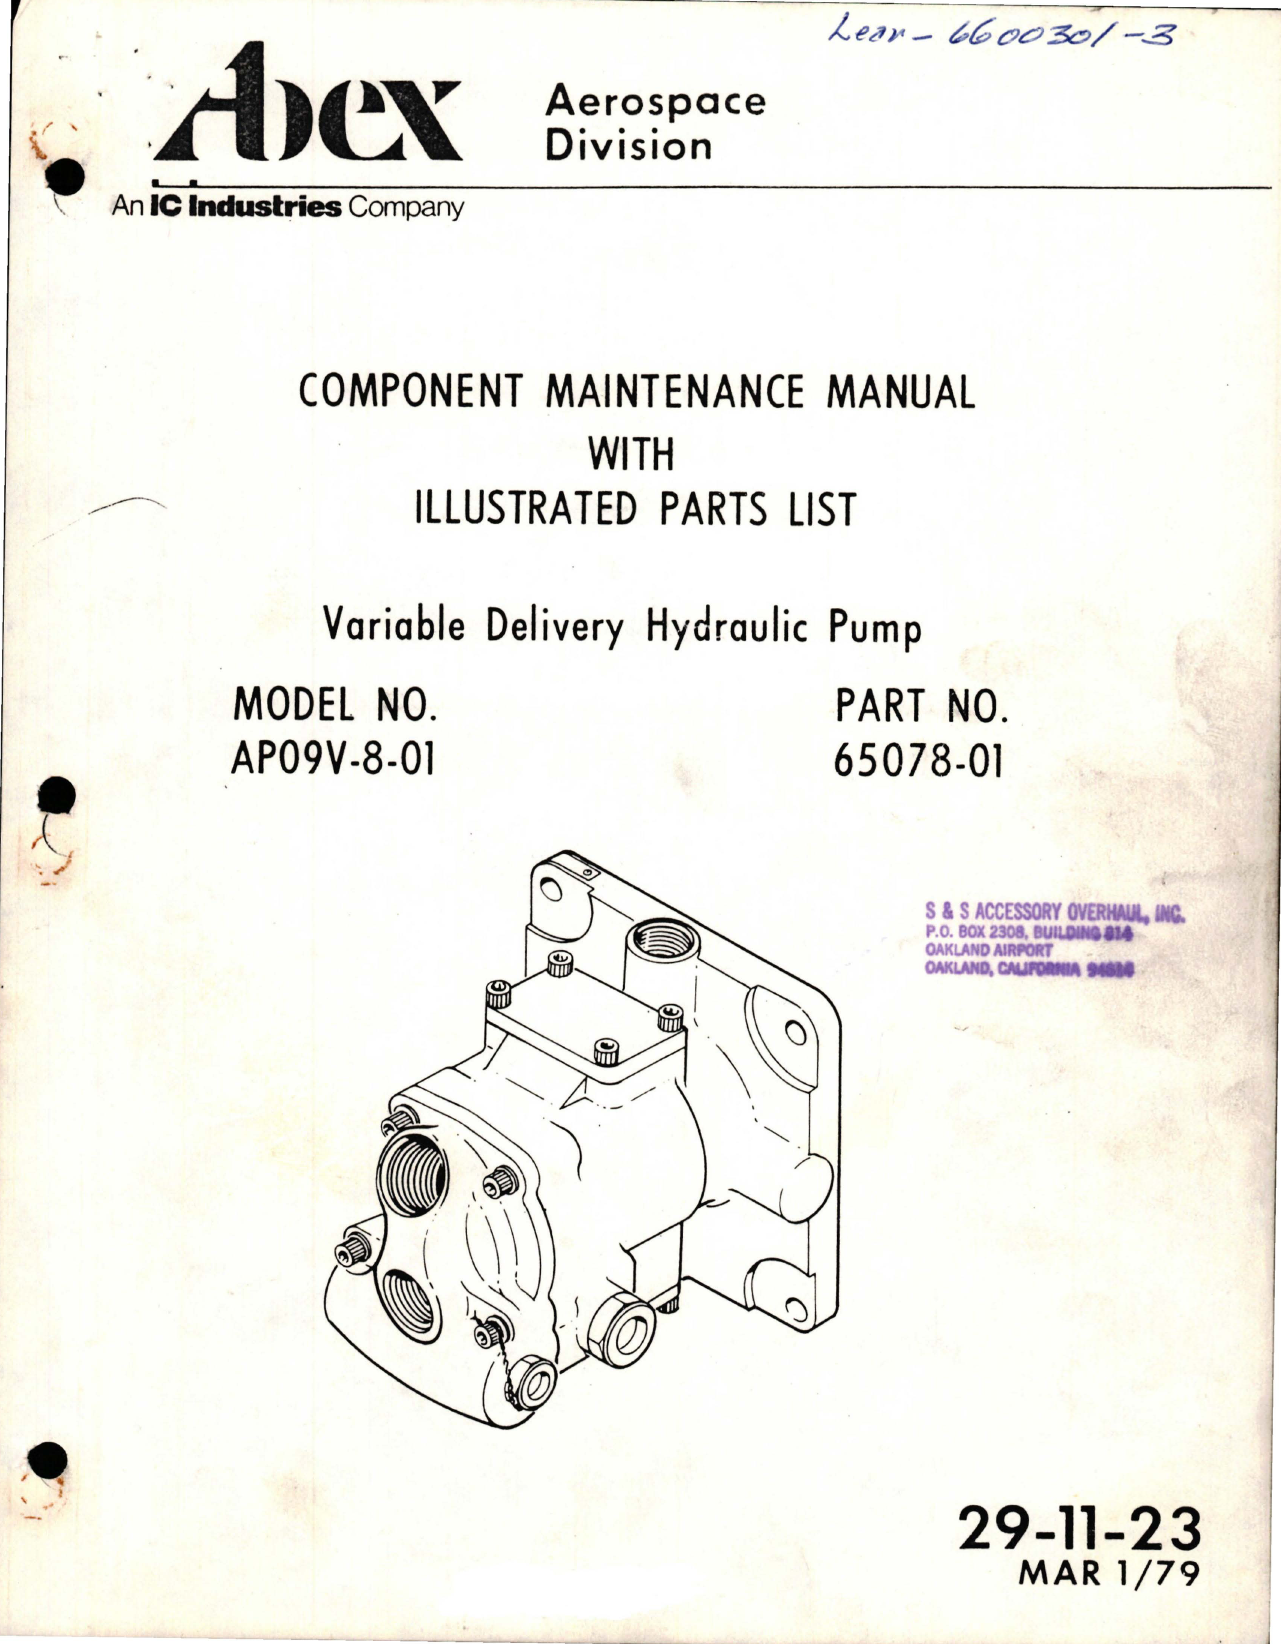 Sample page 1 from AirCorps Library document: Maintenance Manual with Illustrated Parts List for Variable Delivery Hydraulic Pump - Model AP09V-8-01 - Part 65078-01